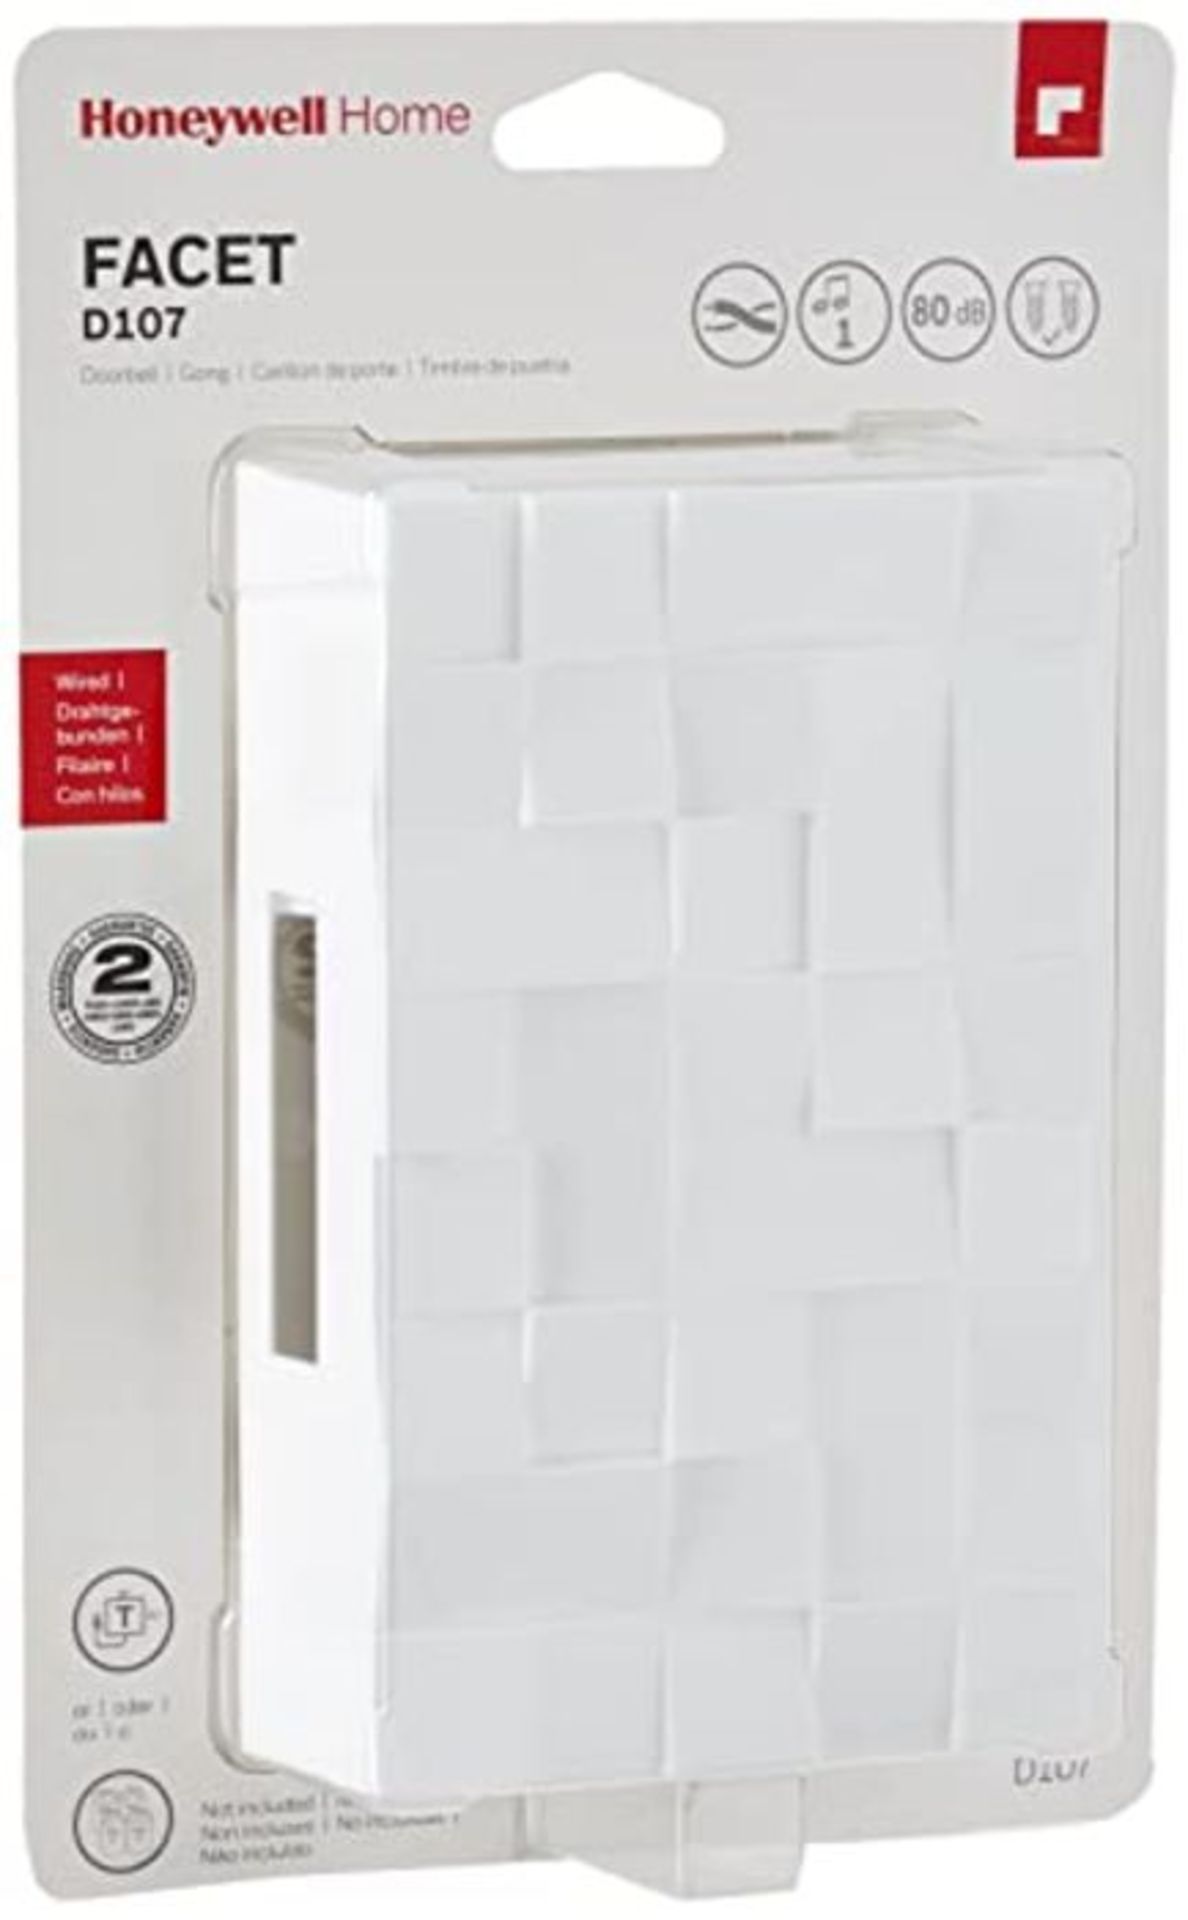 Honeywell Home D107 Facet Classic Wired Doorbell, Applicable